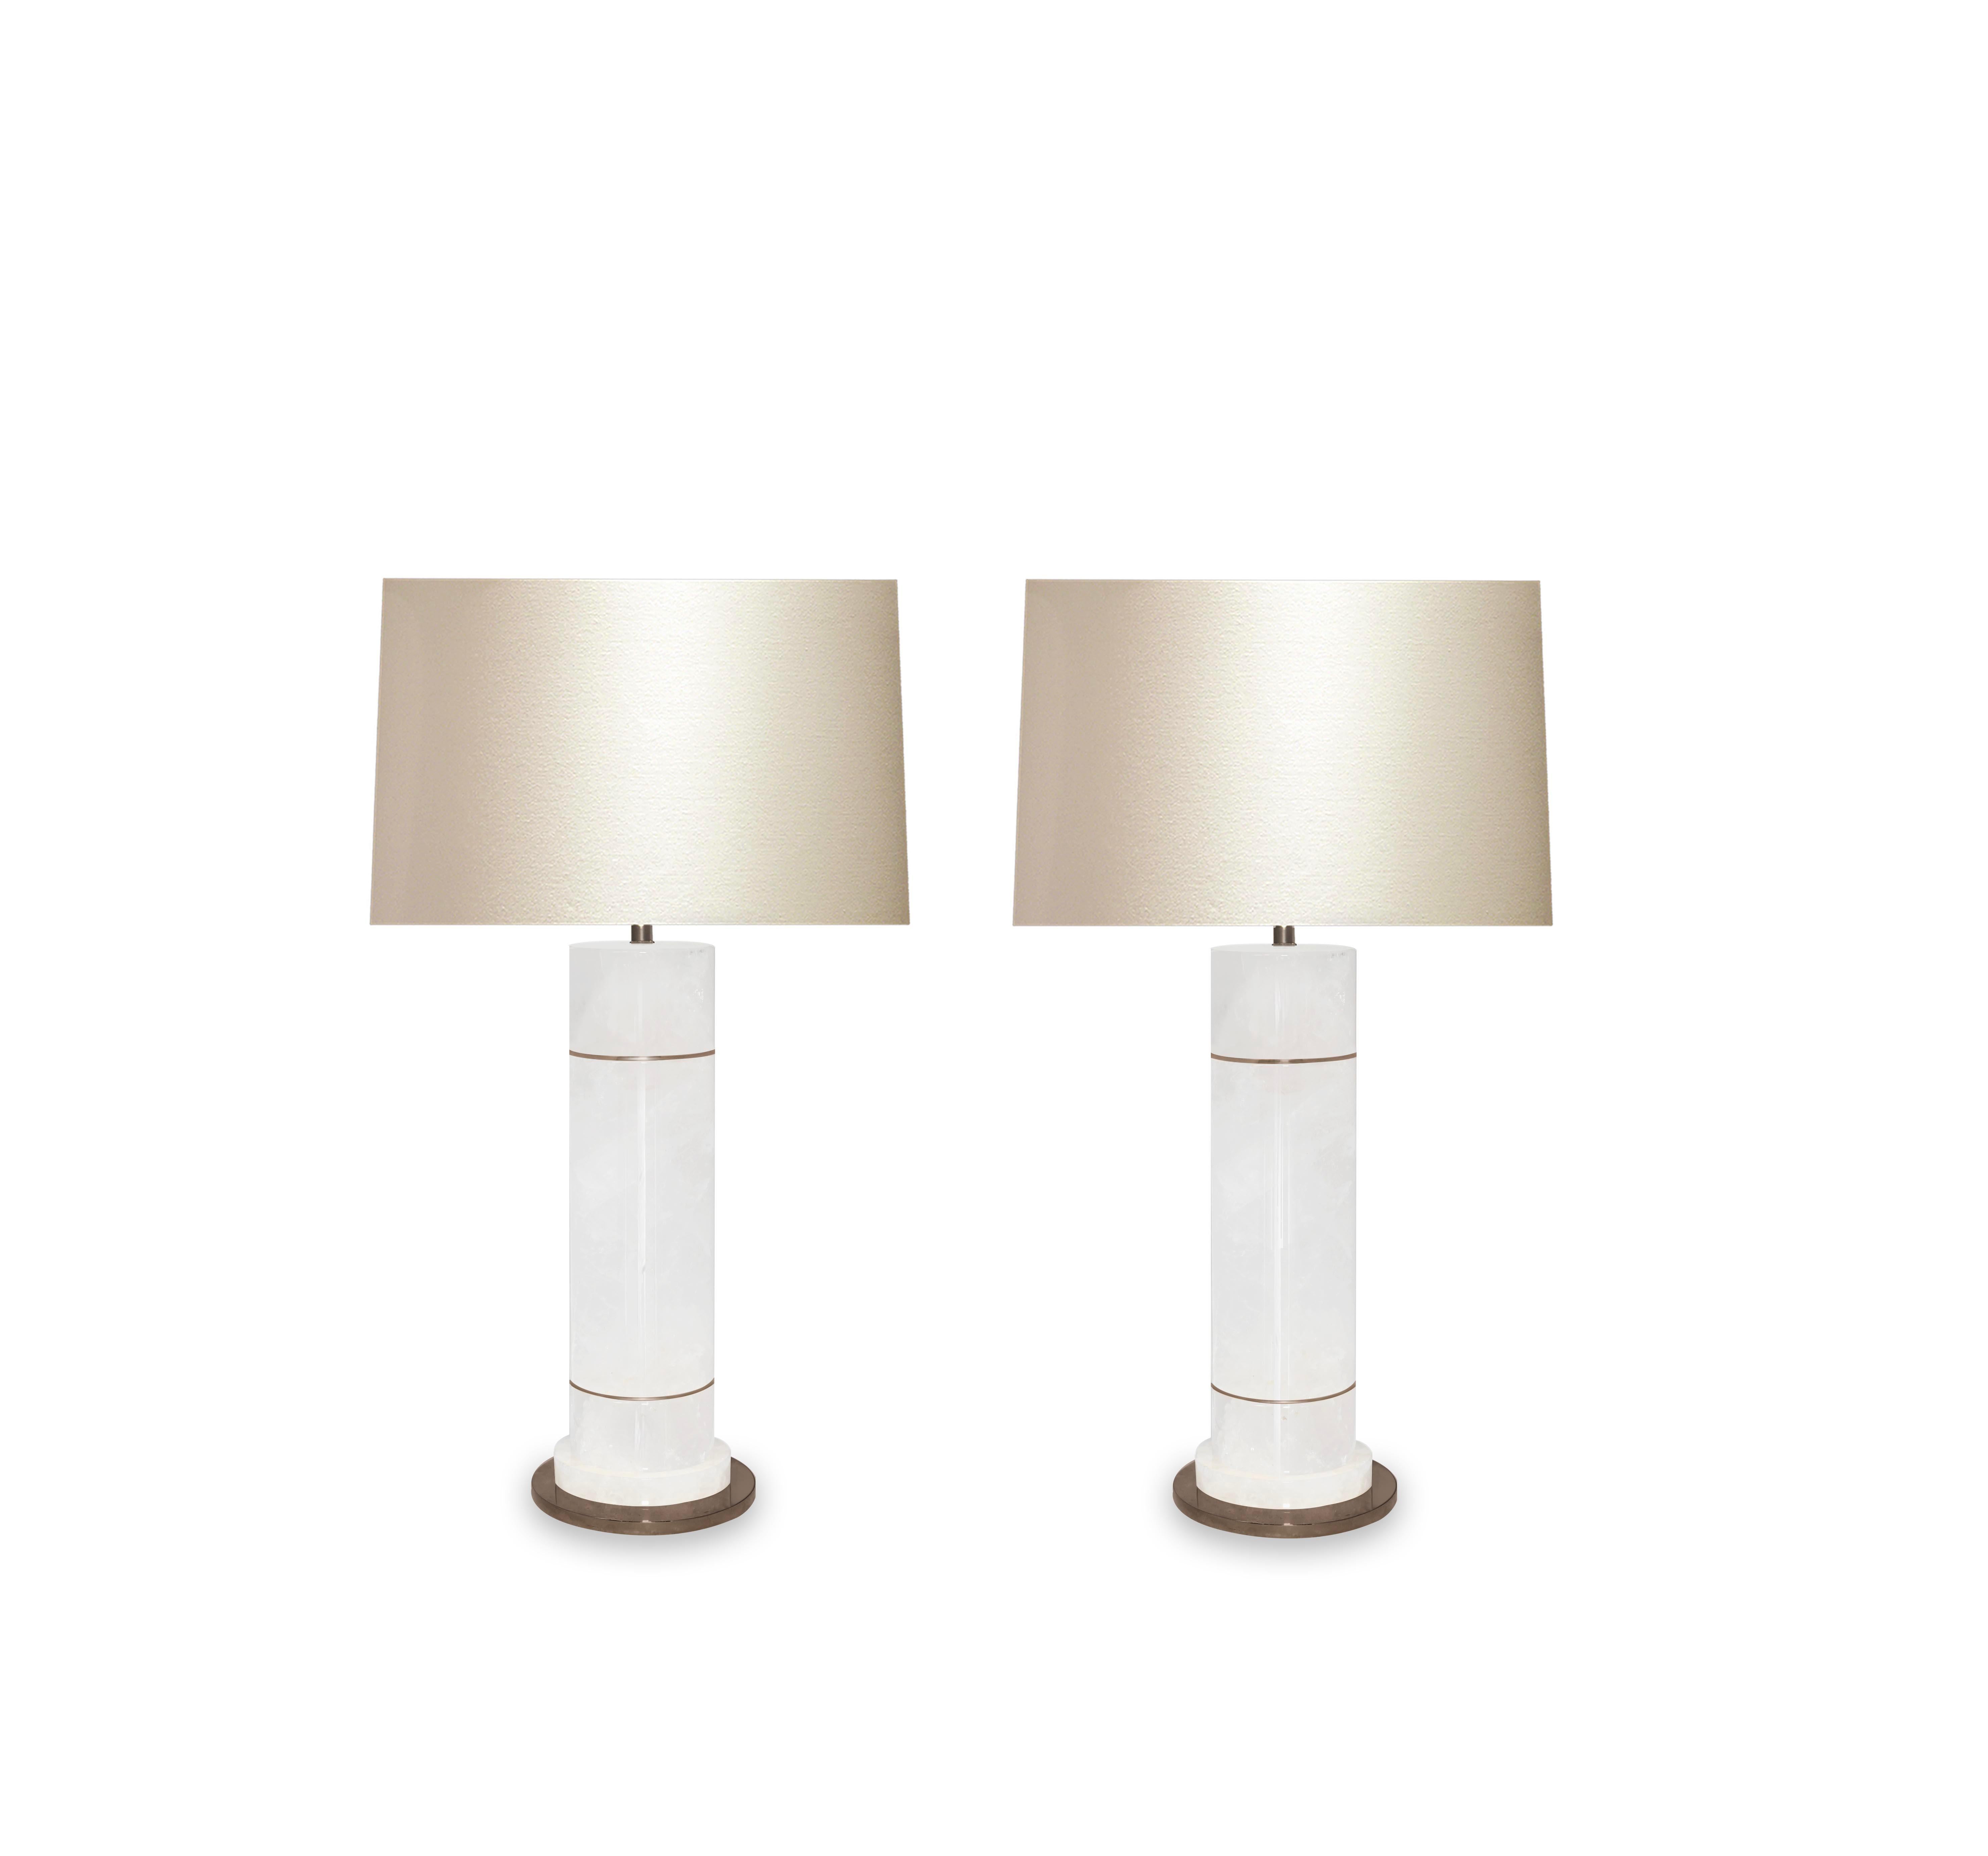 Pair of sectional column rock crystal lamps with antique brass inserts and bases. Created by Phoenix Gallery, NYC.
To the top of rock crystal: 16.75